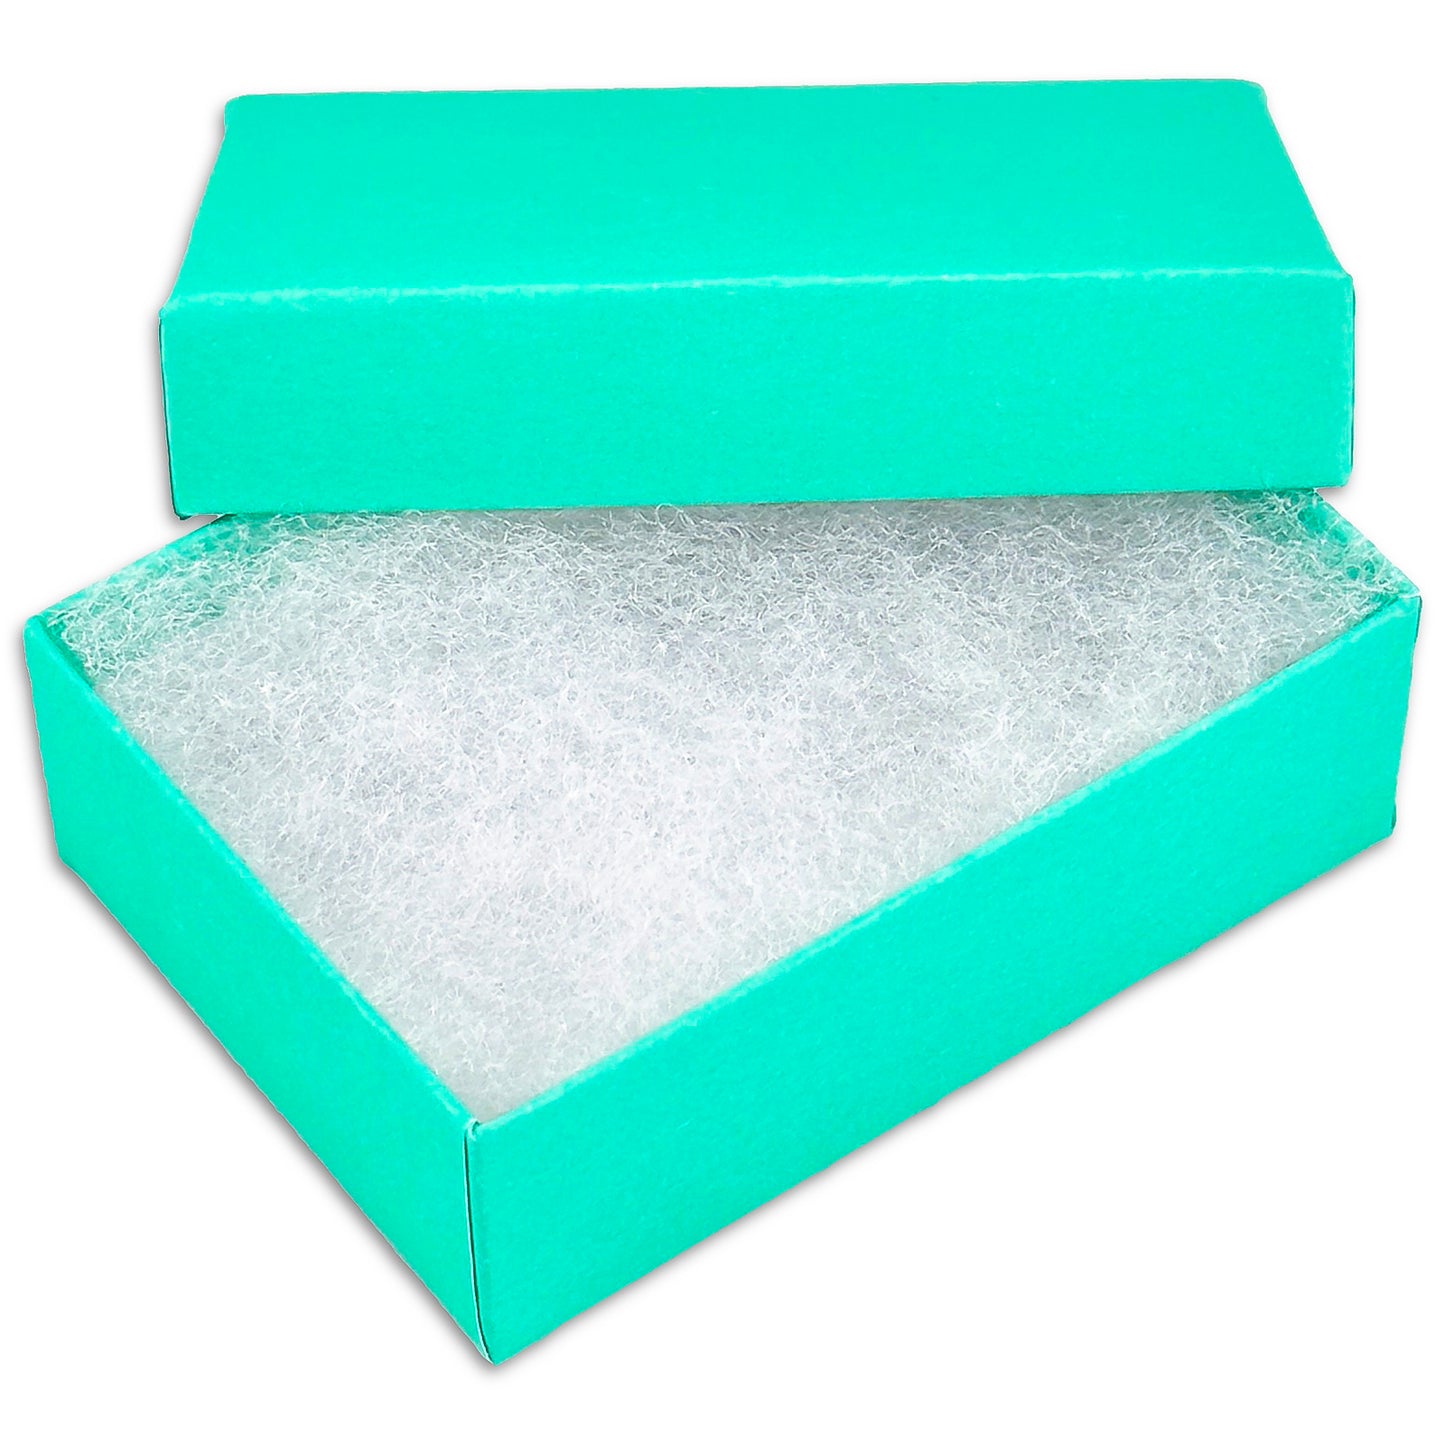 1 7/8" x 1 1/4" x 5/8" Teal Green Cotton Filled Paper Box